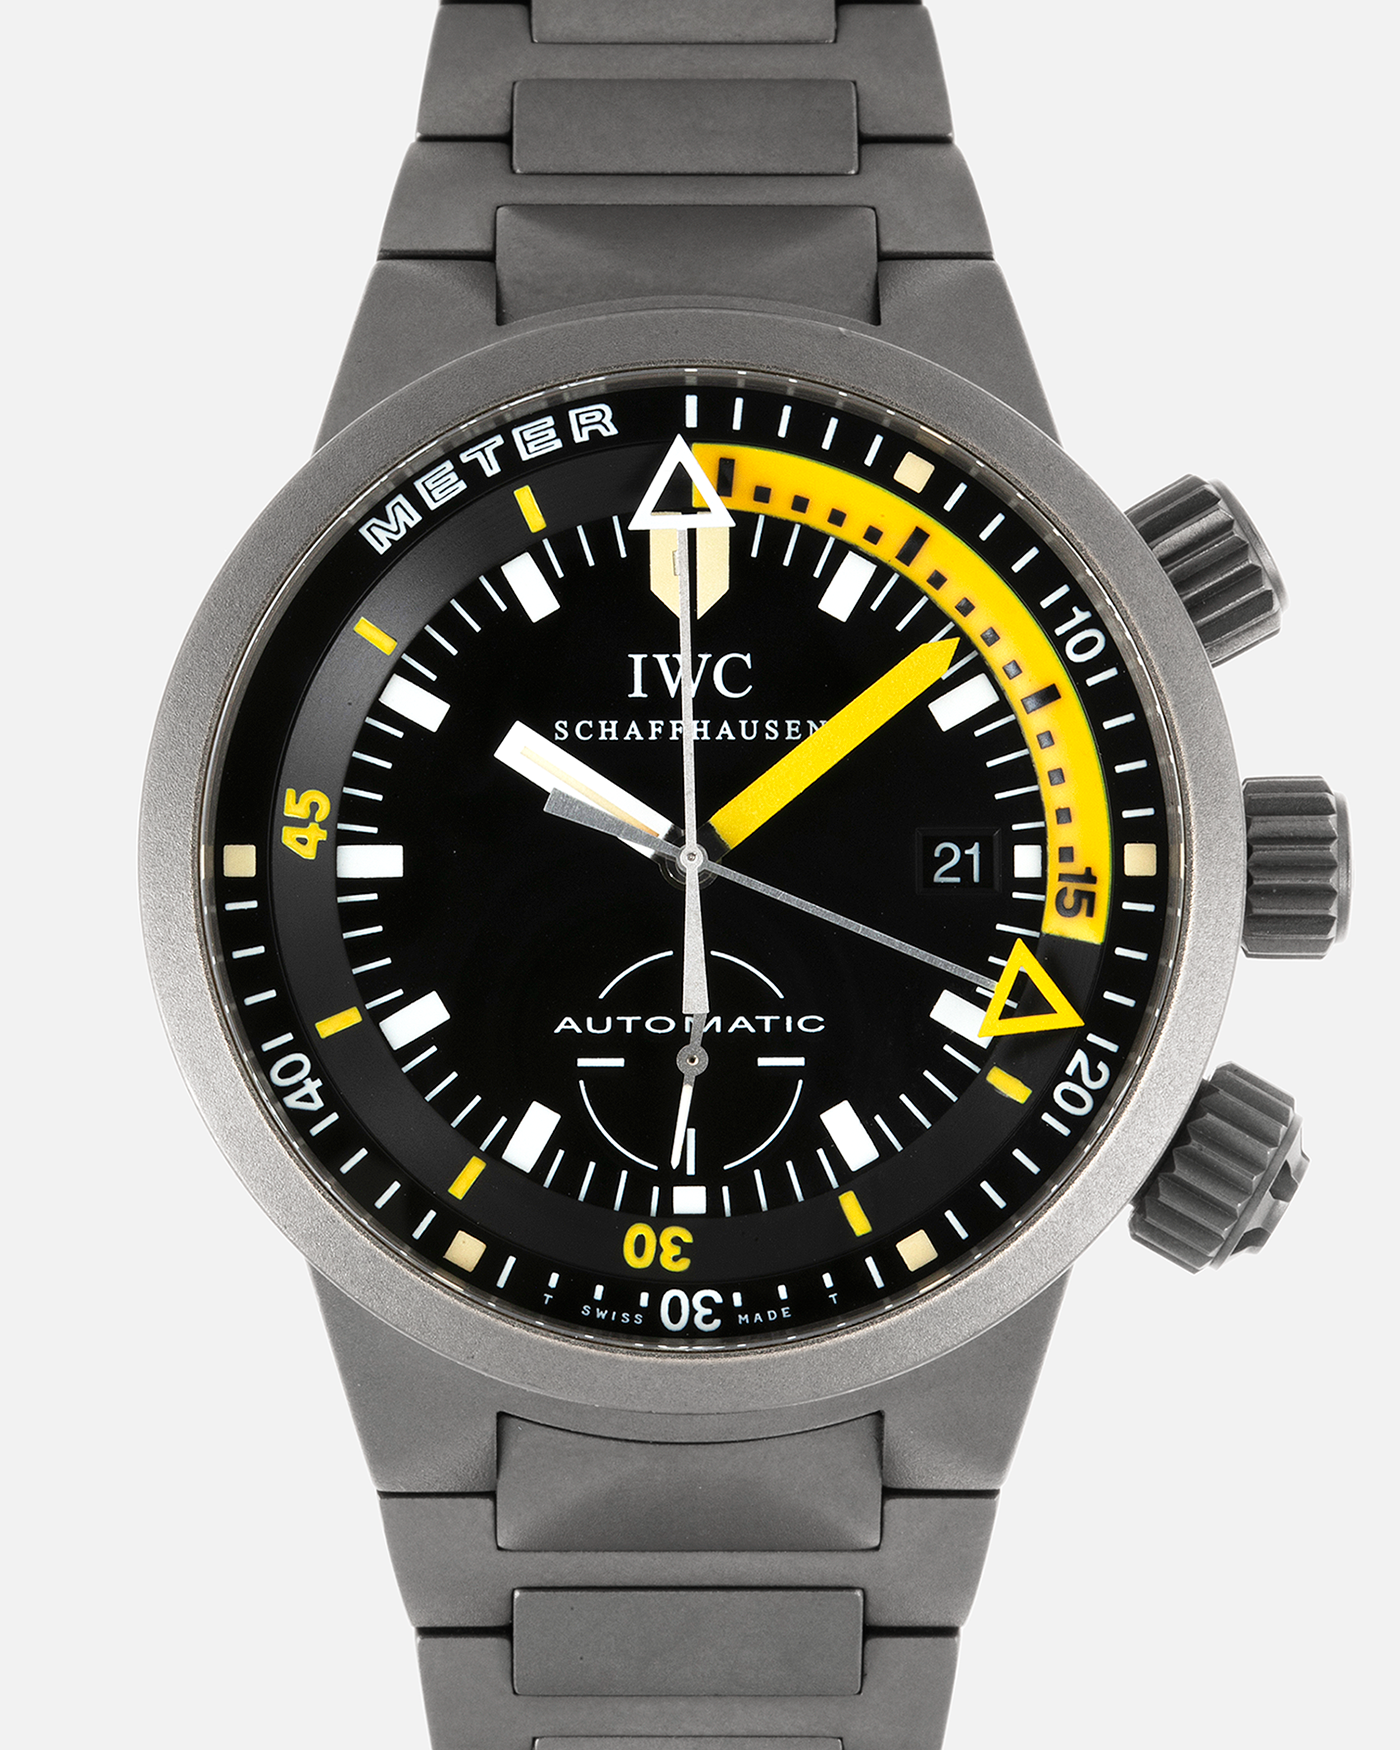 Brand: IWC Year: 1999 Model: GST Ref. 3527 “Deep One” Material: Bead-blasted Titanium Movement: In-house IWC Cal. 8914, Self-Winding Case Diameter: 42.8mm Bracelet/Strap: Bead-blasted IWC Titanium Bracelet